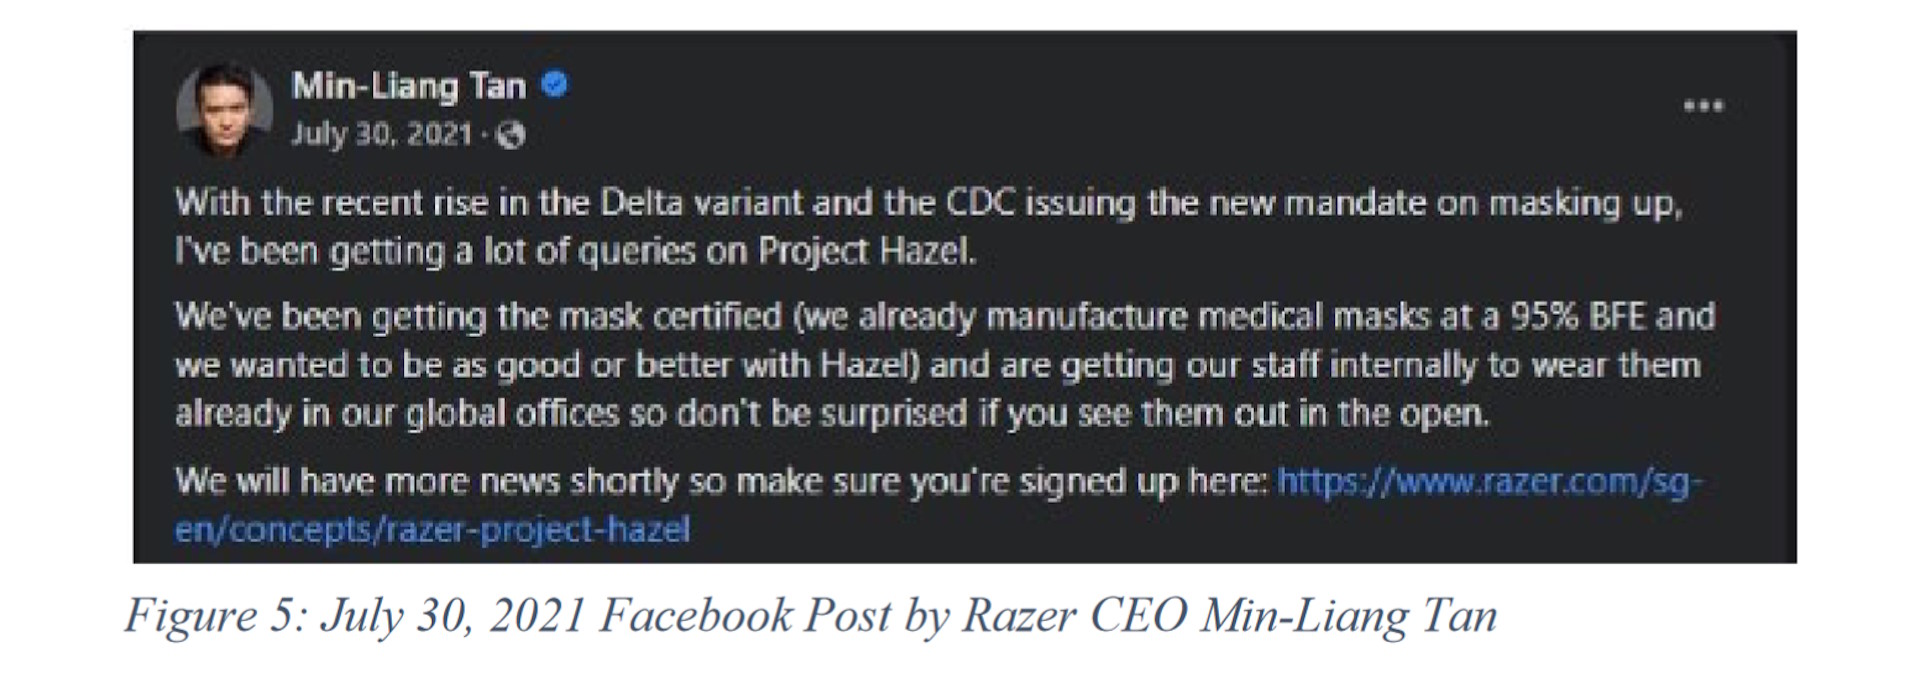 Razer forced to pay more than $1M in refunds for its RGB 'surgical N95 respirators' that were not N95 respirators